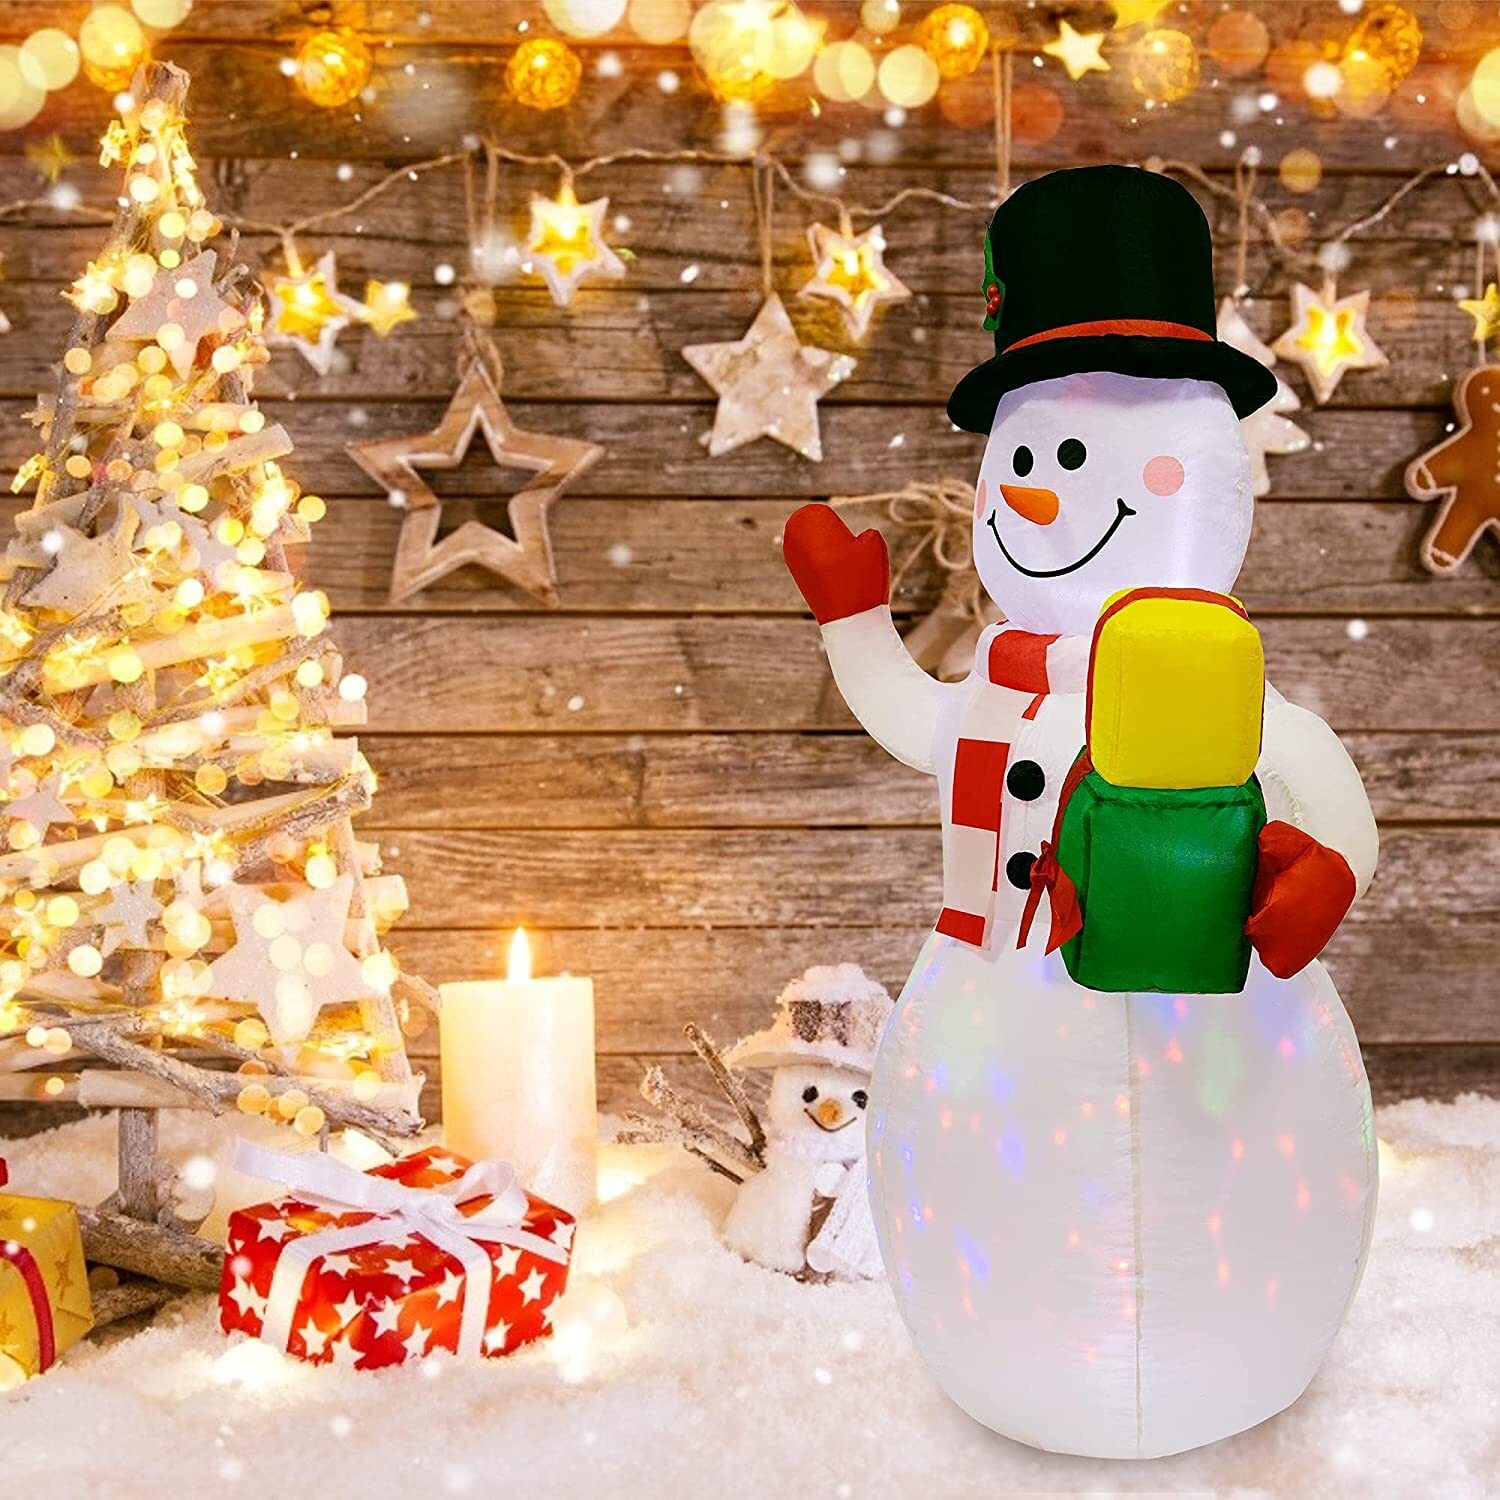 5Ft Christmas Inflatables Snowman with Built-in Colorful Rotating LED Lights for Indoor Outdoor Yard Garden Decor Christmas Decorations